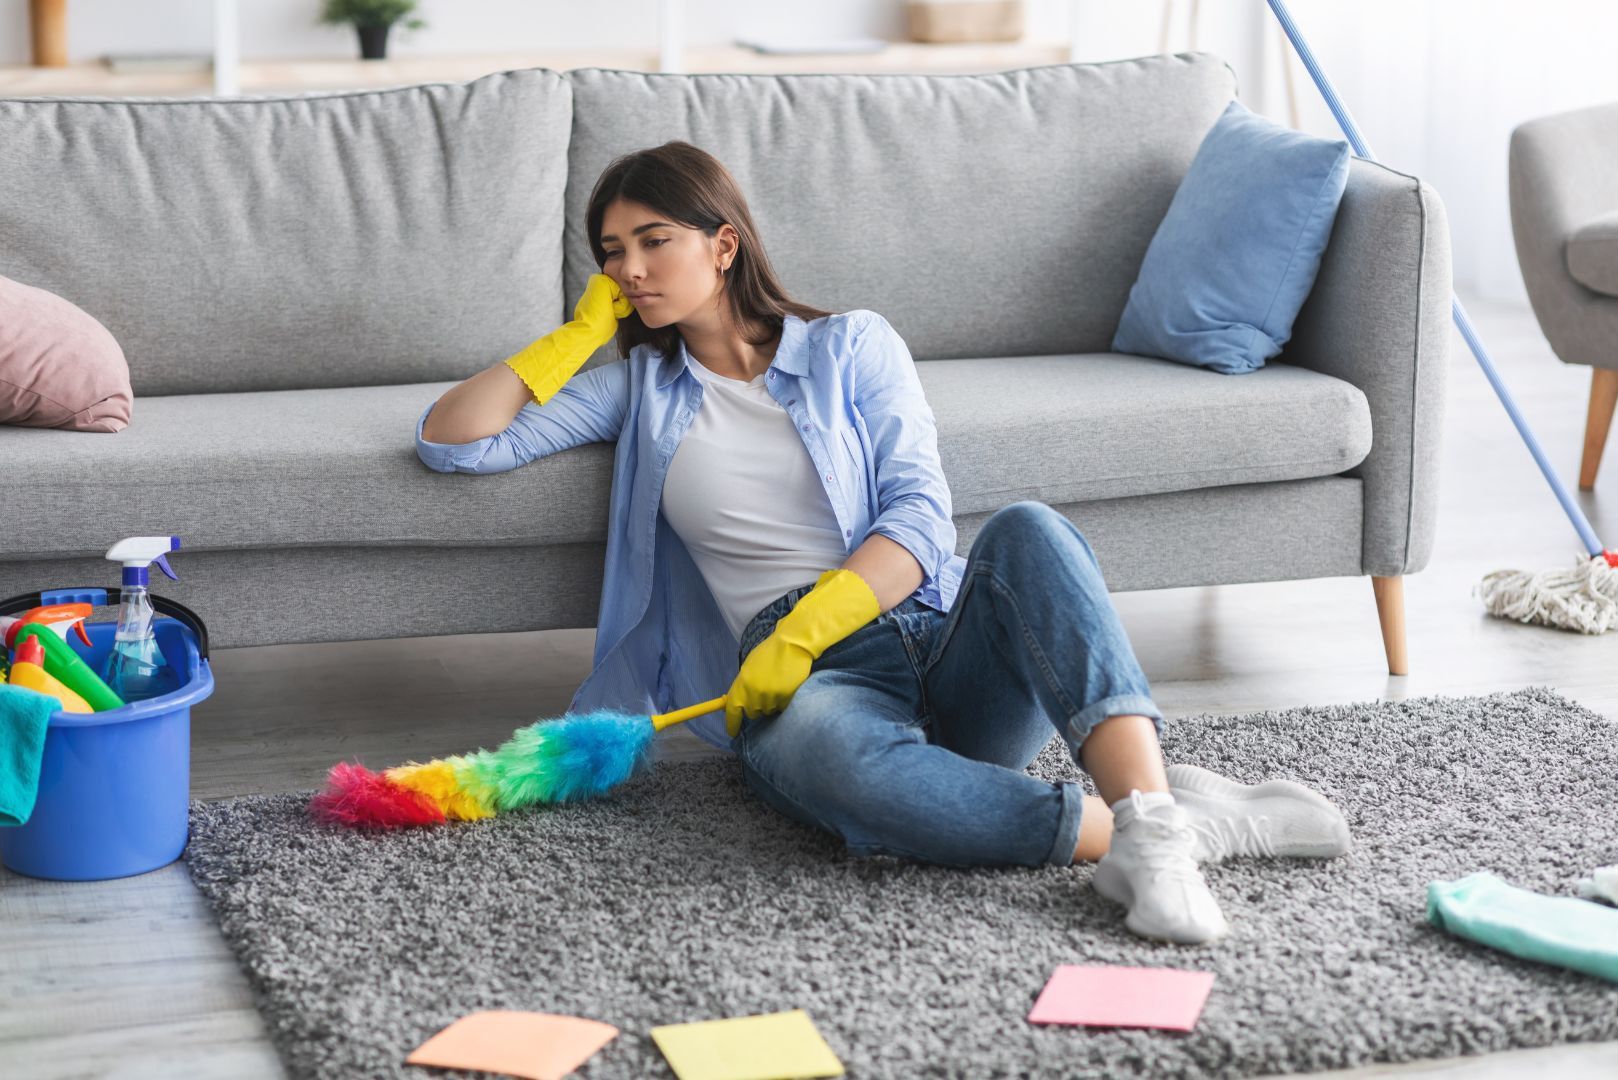 A woman is sitting on the floor in front of a couch holding a duster.